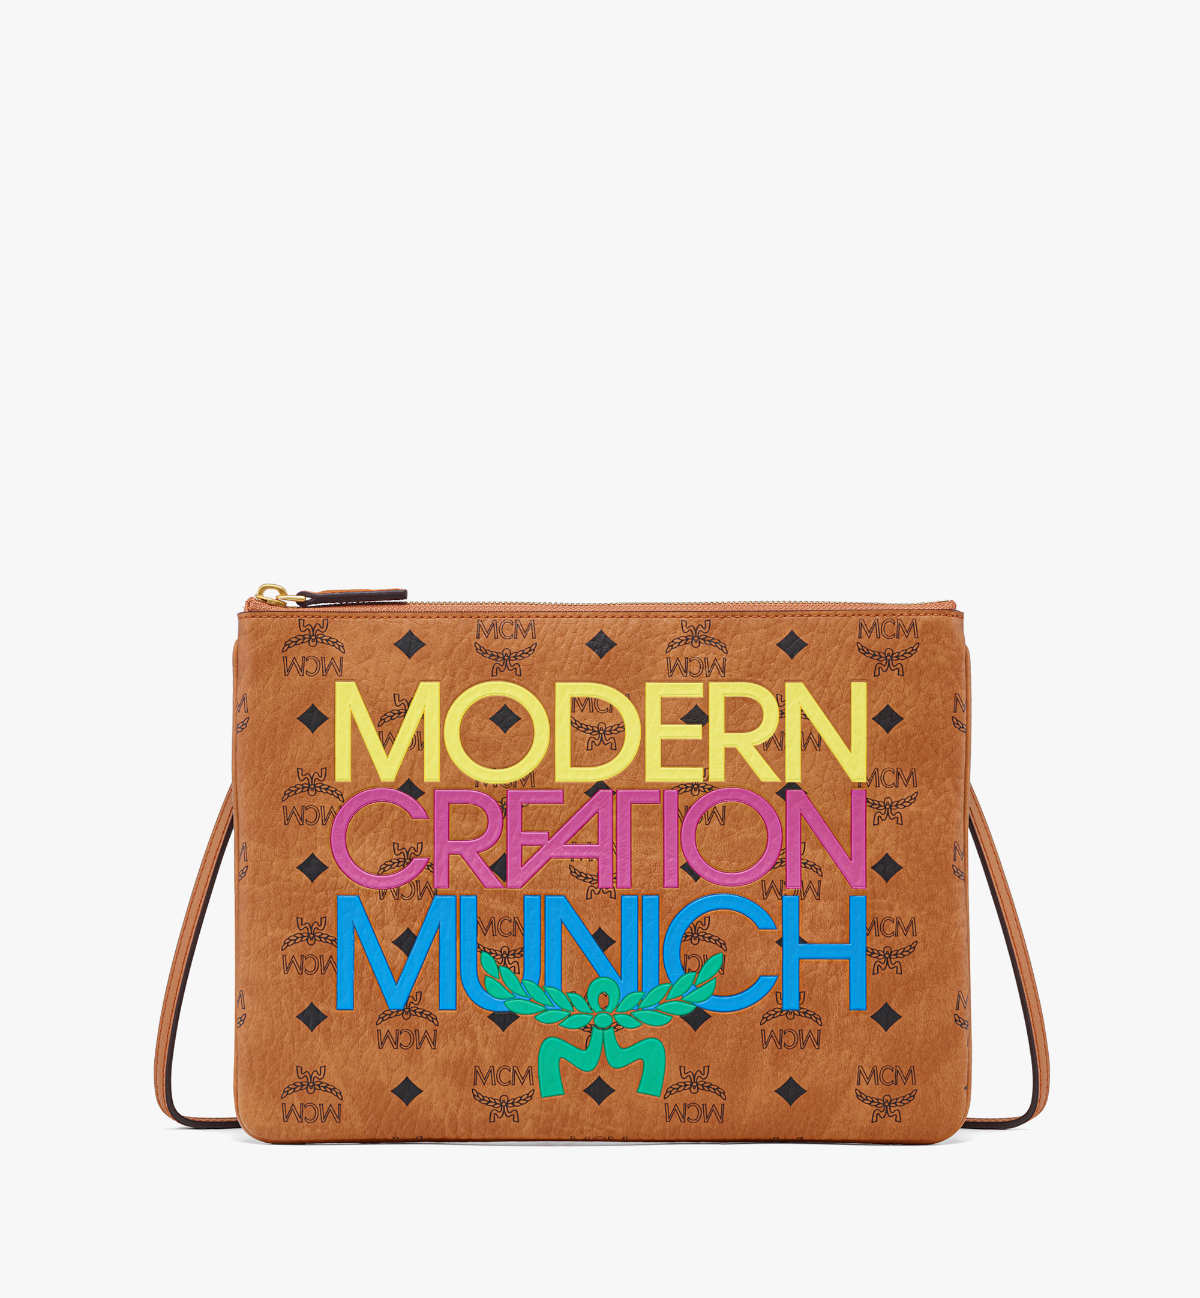 MCM And Honey Dijon Drop The Collab With A Retro Classic Touch